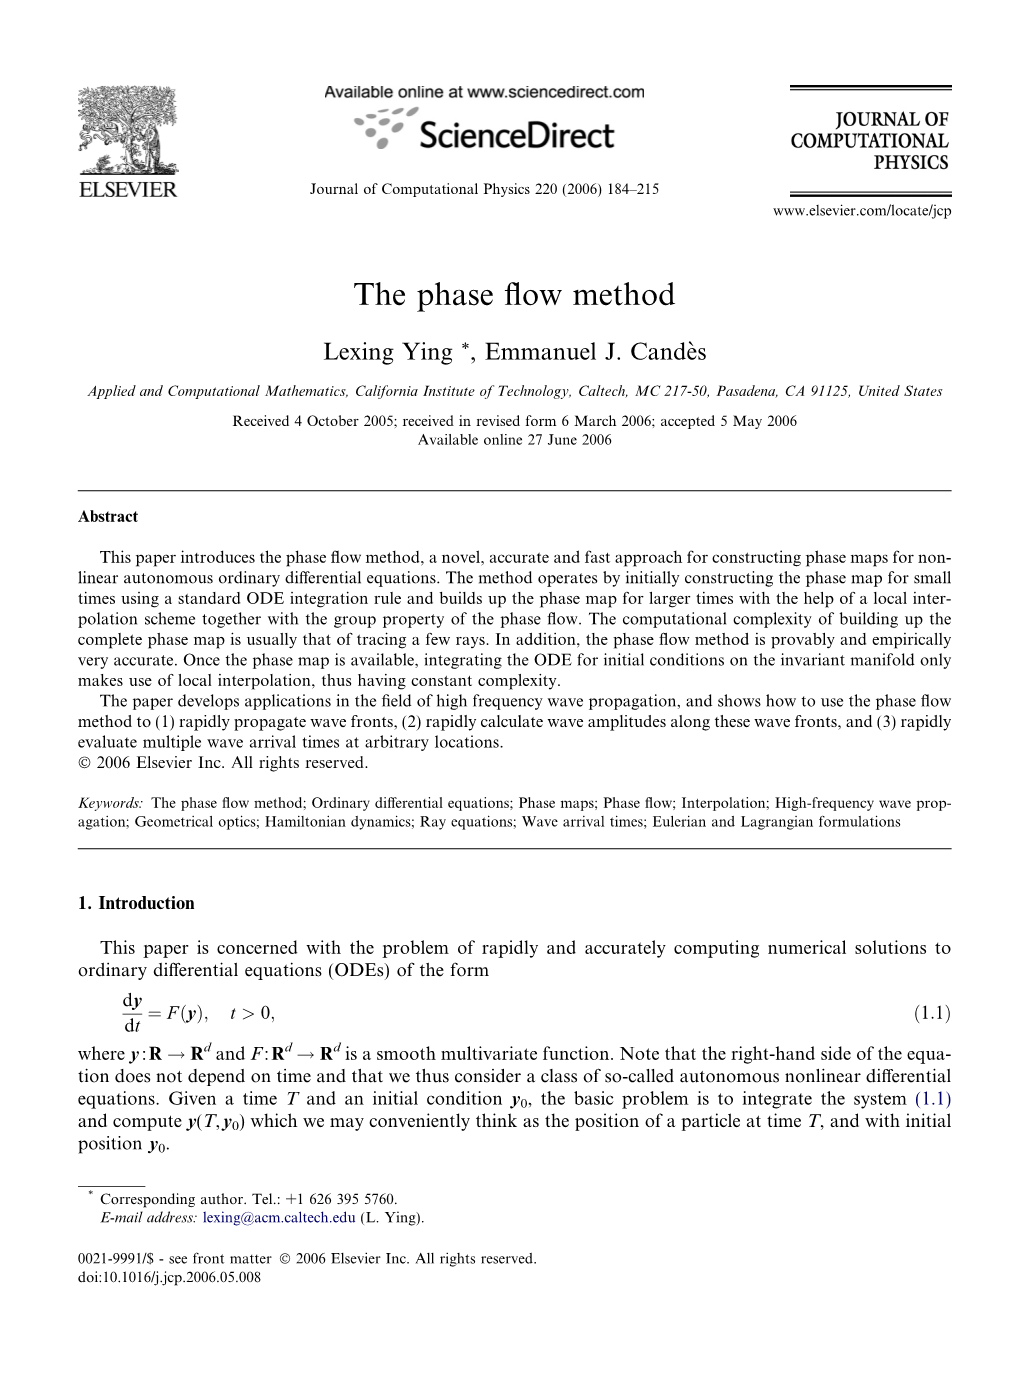 The Phase Flow Method